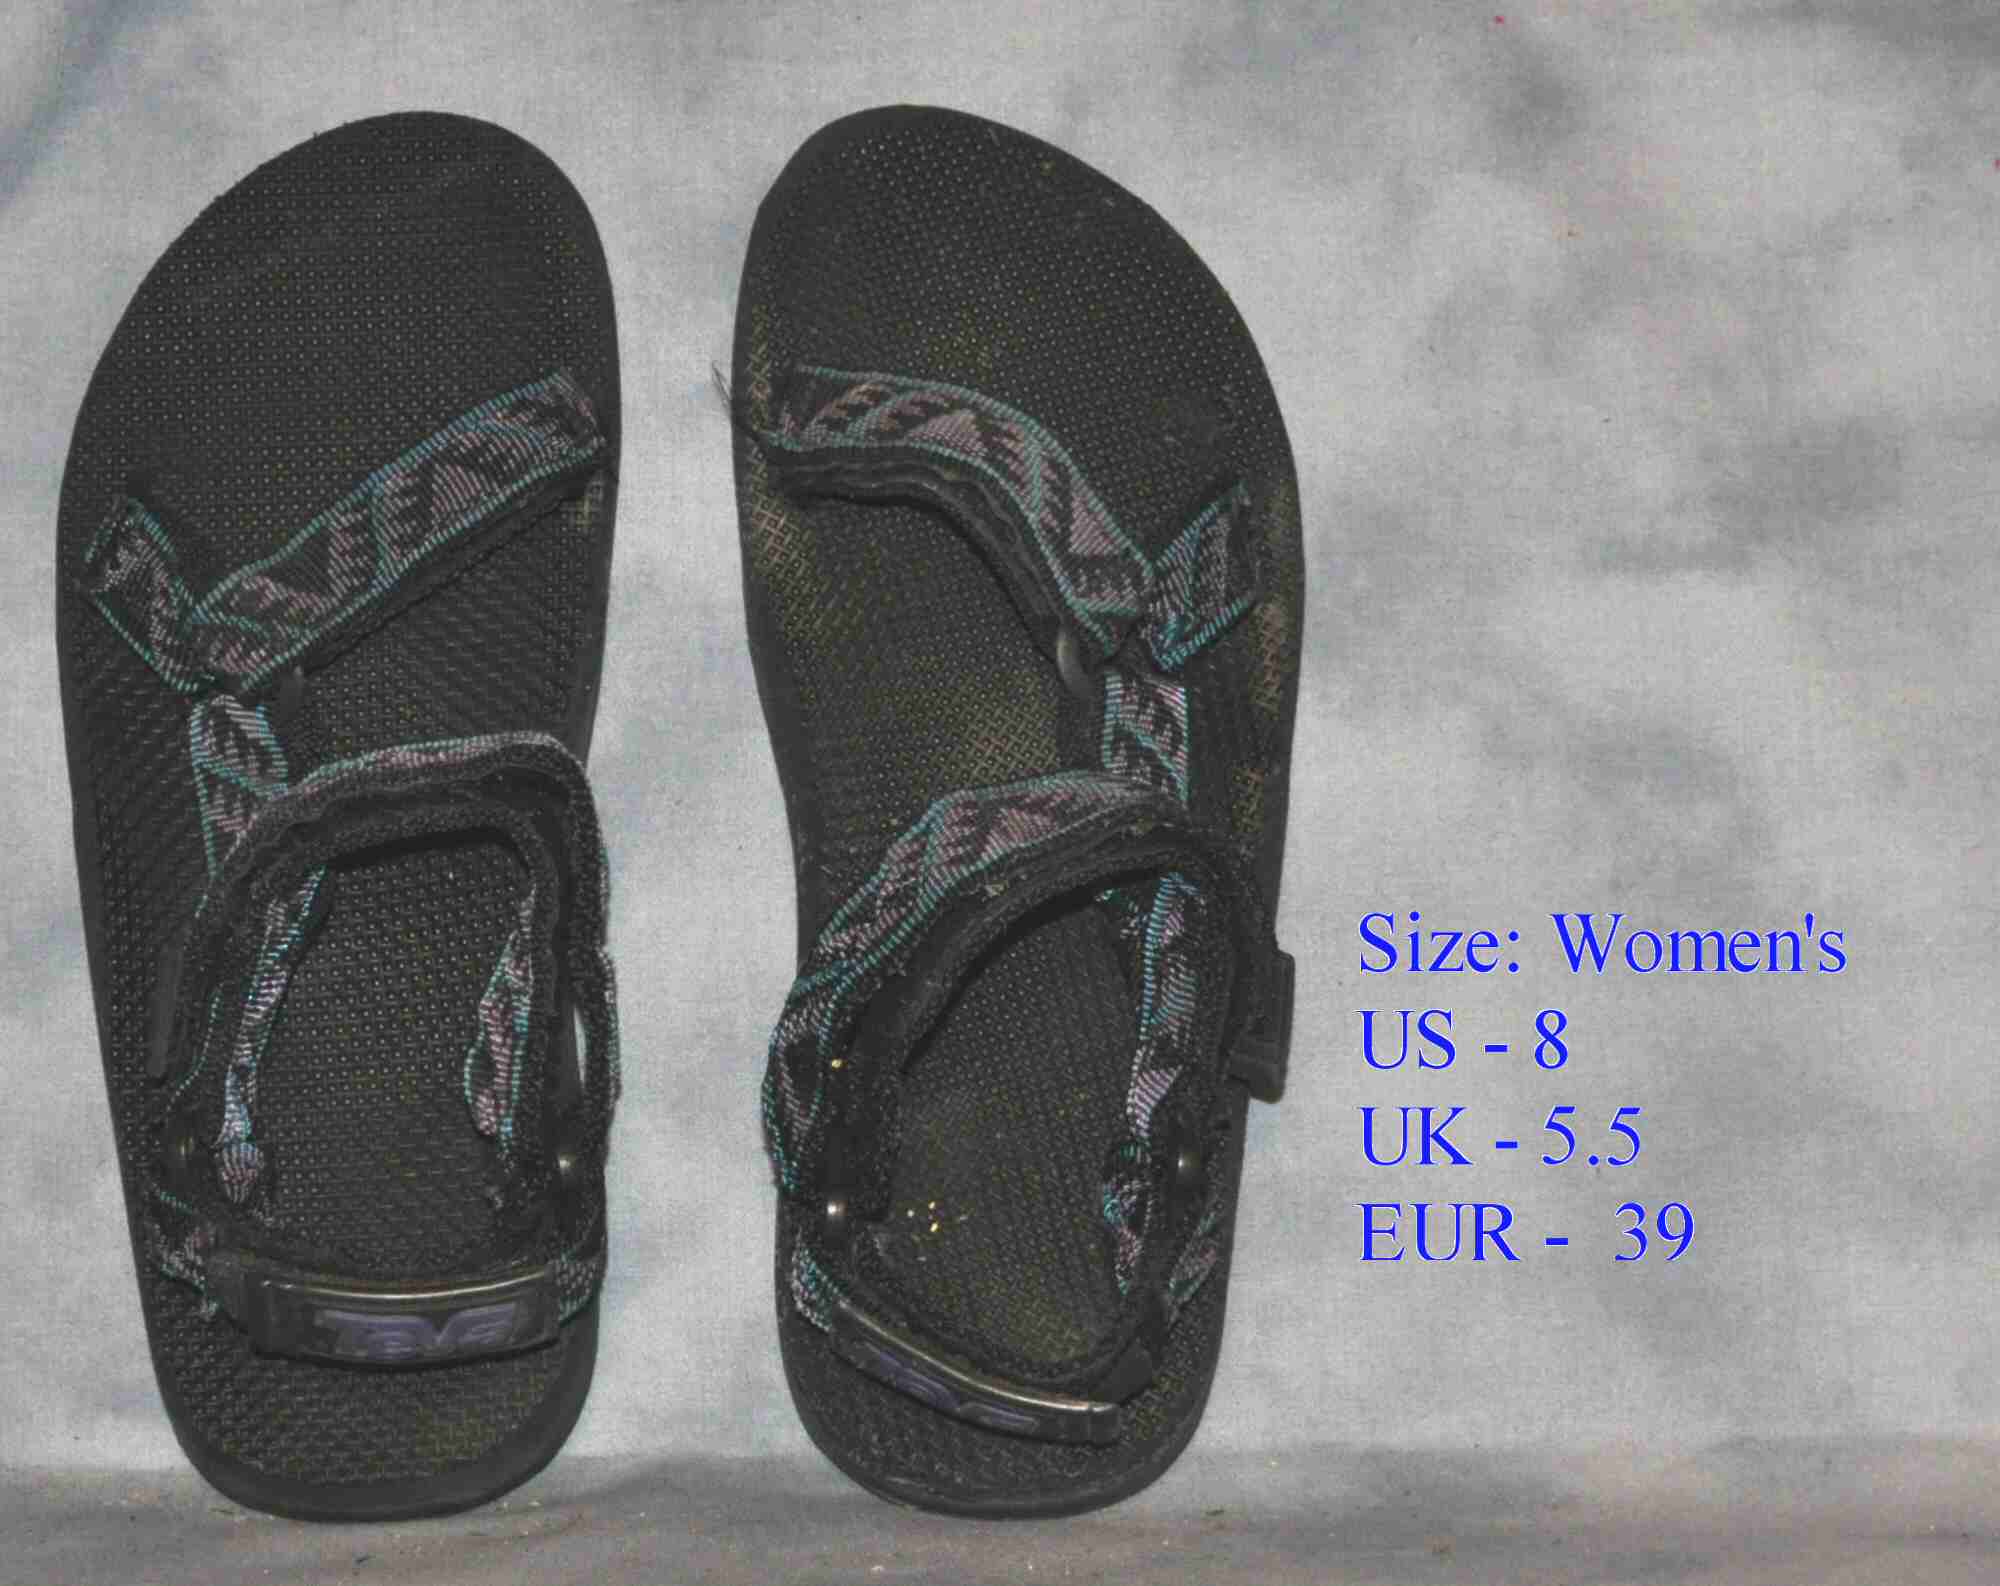 Details about Womens size 8 TEVA Water Sandals hiking shoes 3160